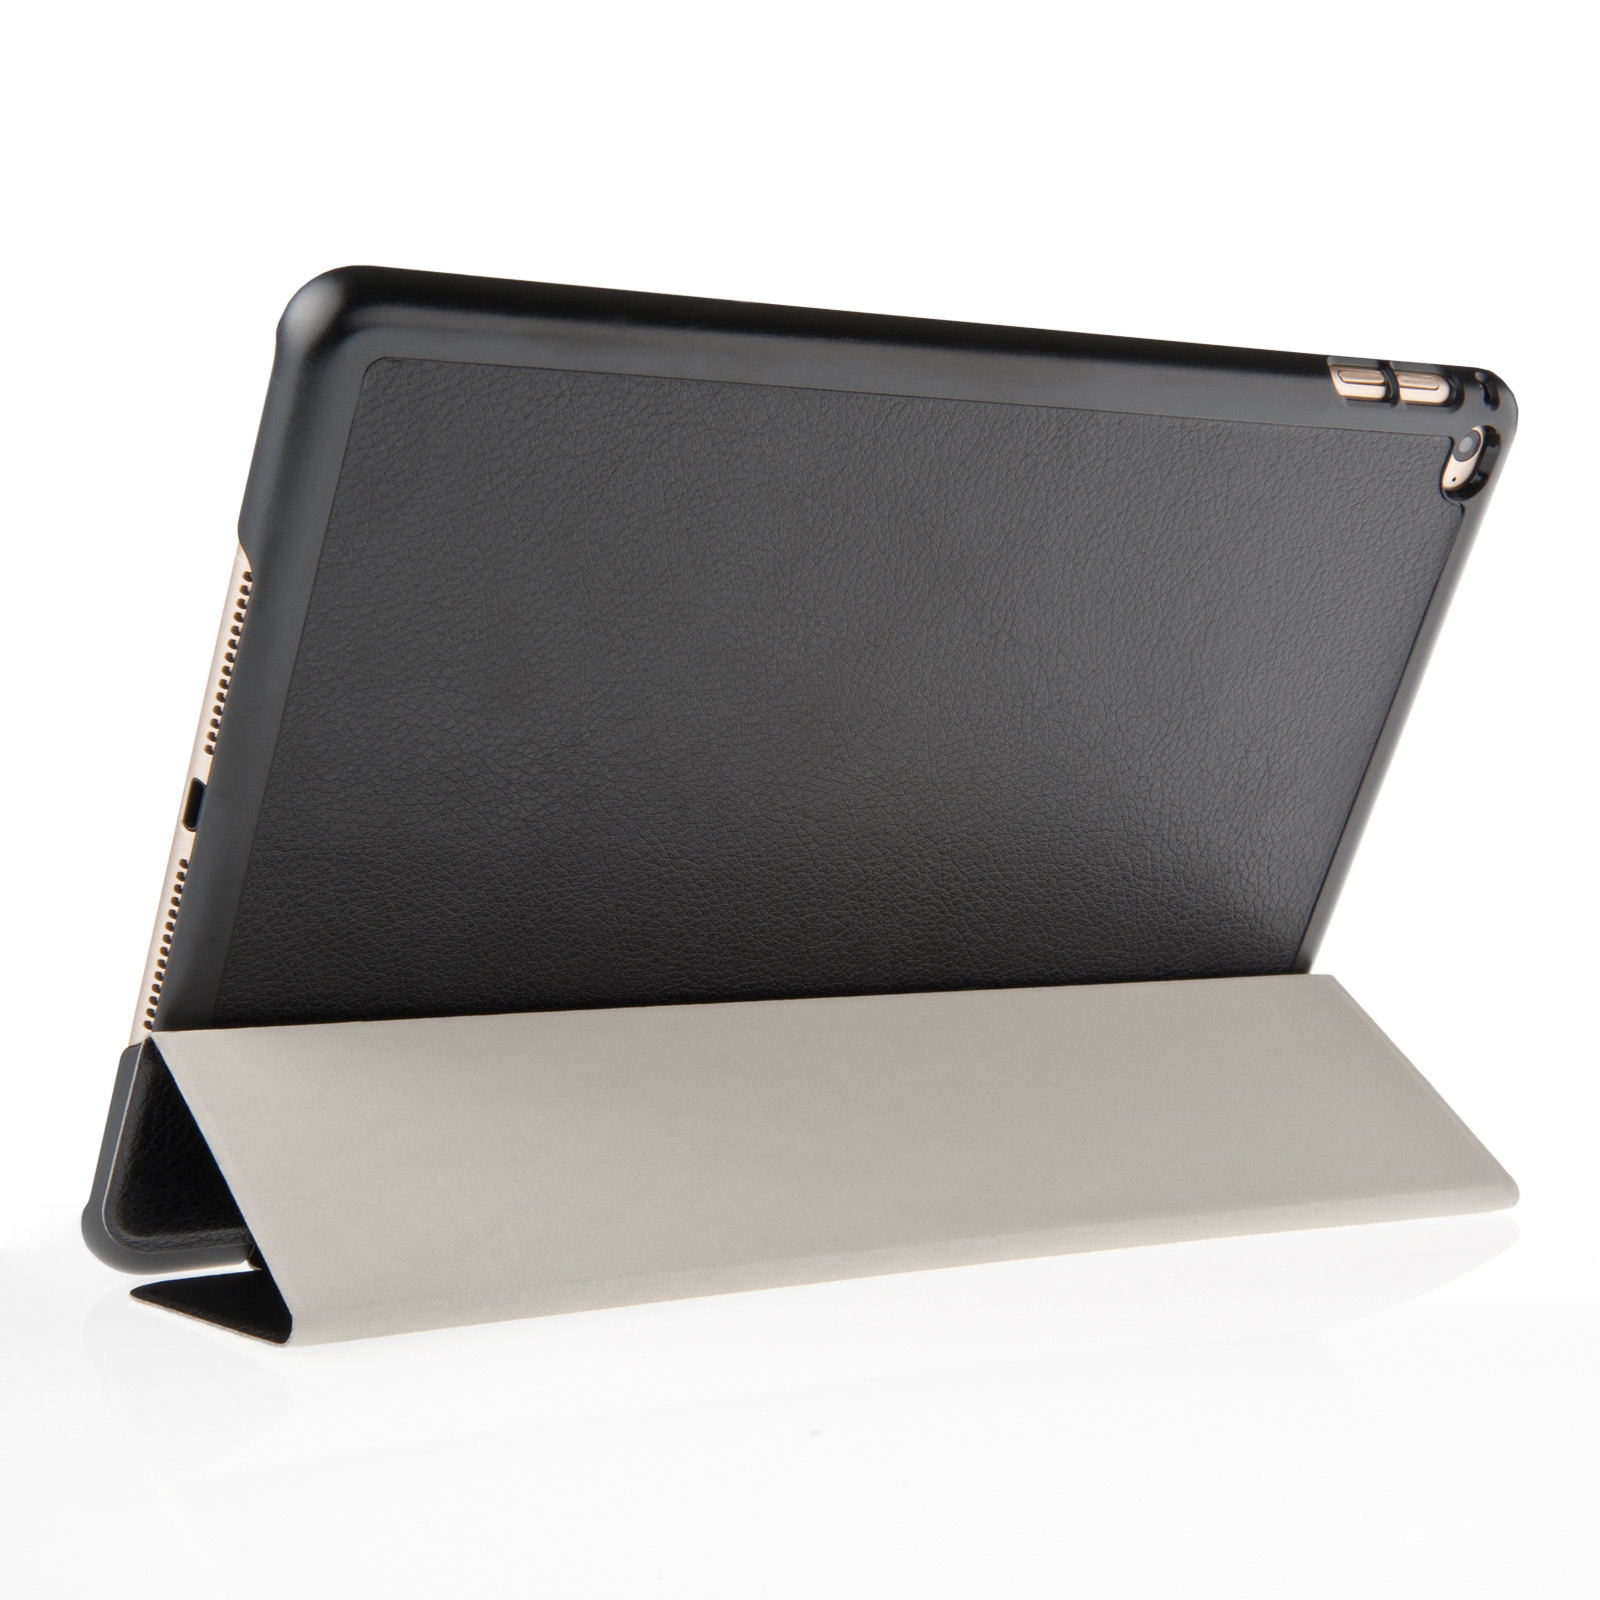 YouSave iPad Air 2 PU Leather Smart Cover with Sleep/Wake and Stand Functions Black